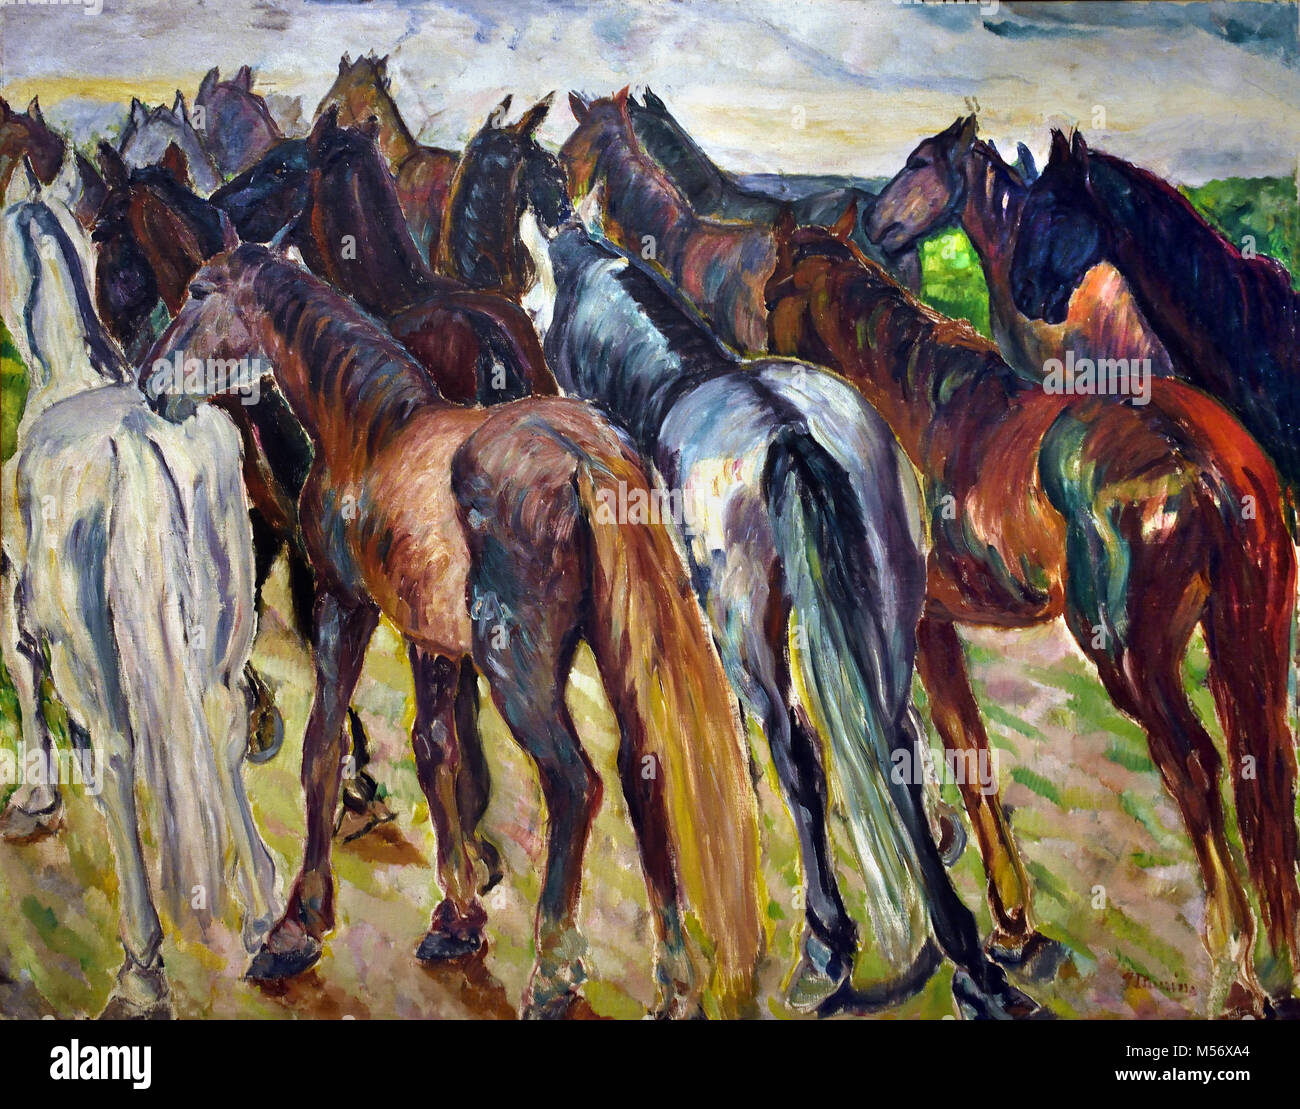 Colts in the Country 1912 Iturrino González, Francisco (Santander, Cantabria, 1864 -  Cagnes-sur-Mer, Francia, 1924) 20th, century, Spain, Spanish, Stock Photo